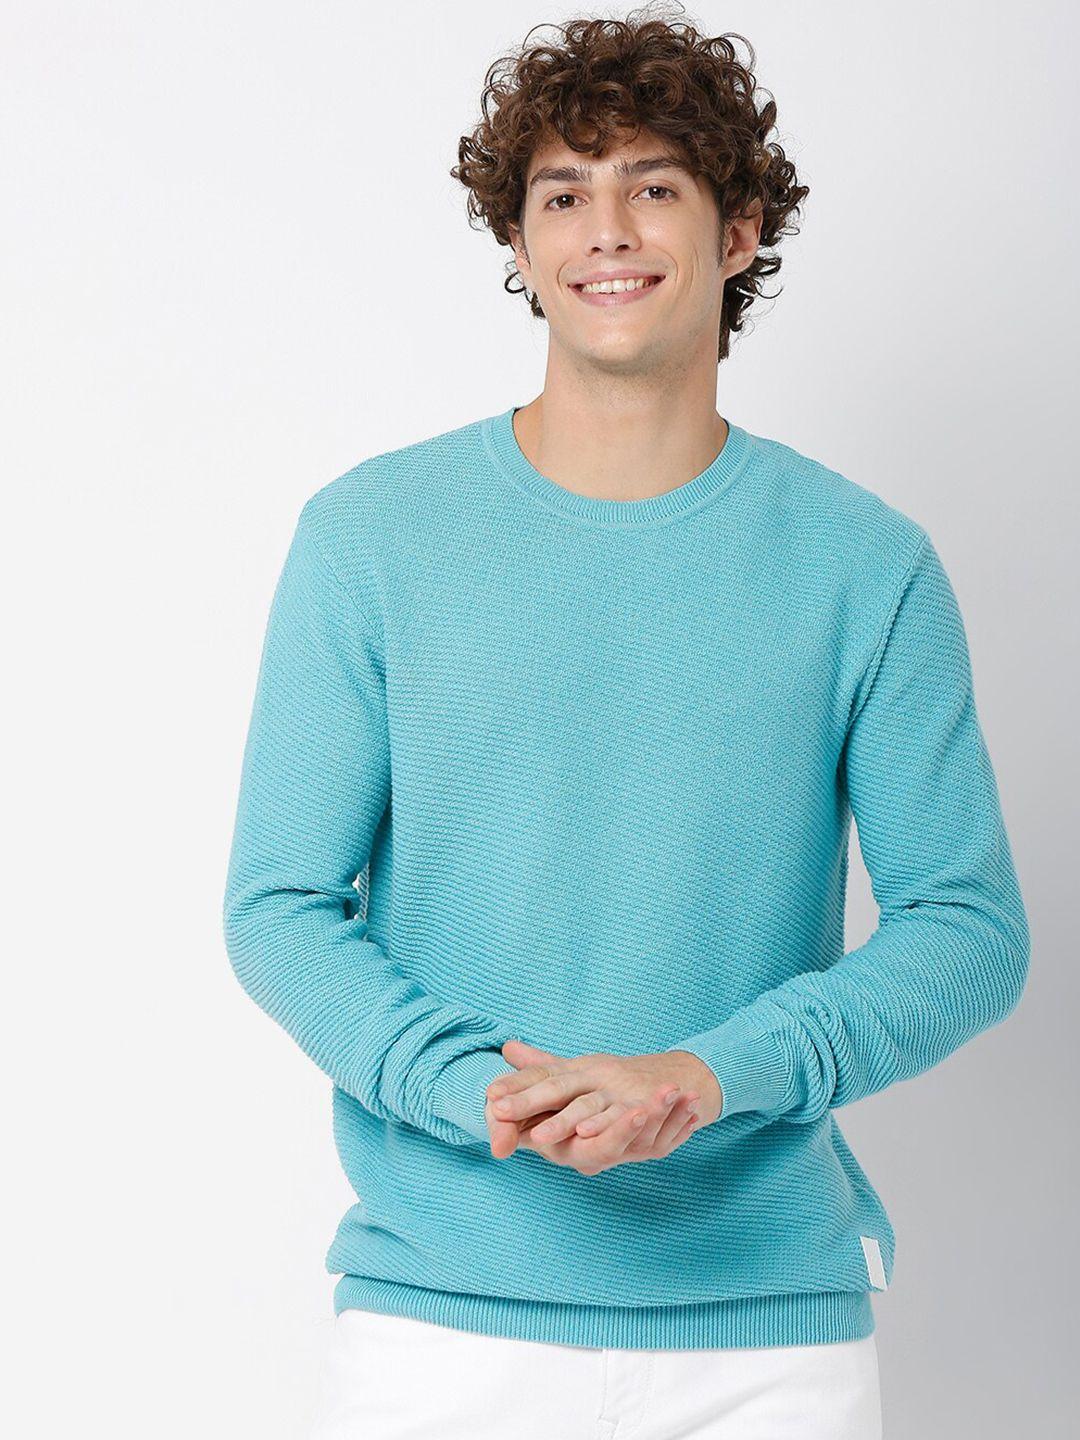 mufti-men-blue-pure-cotton-knitted-pullover